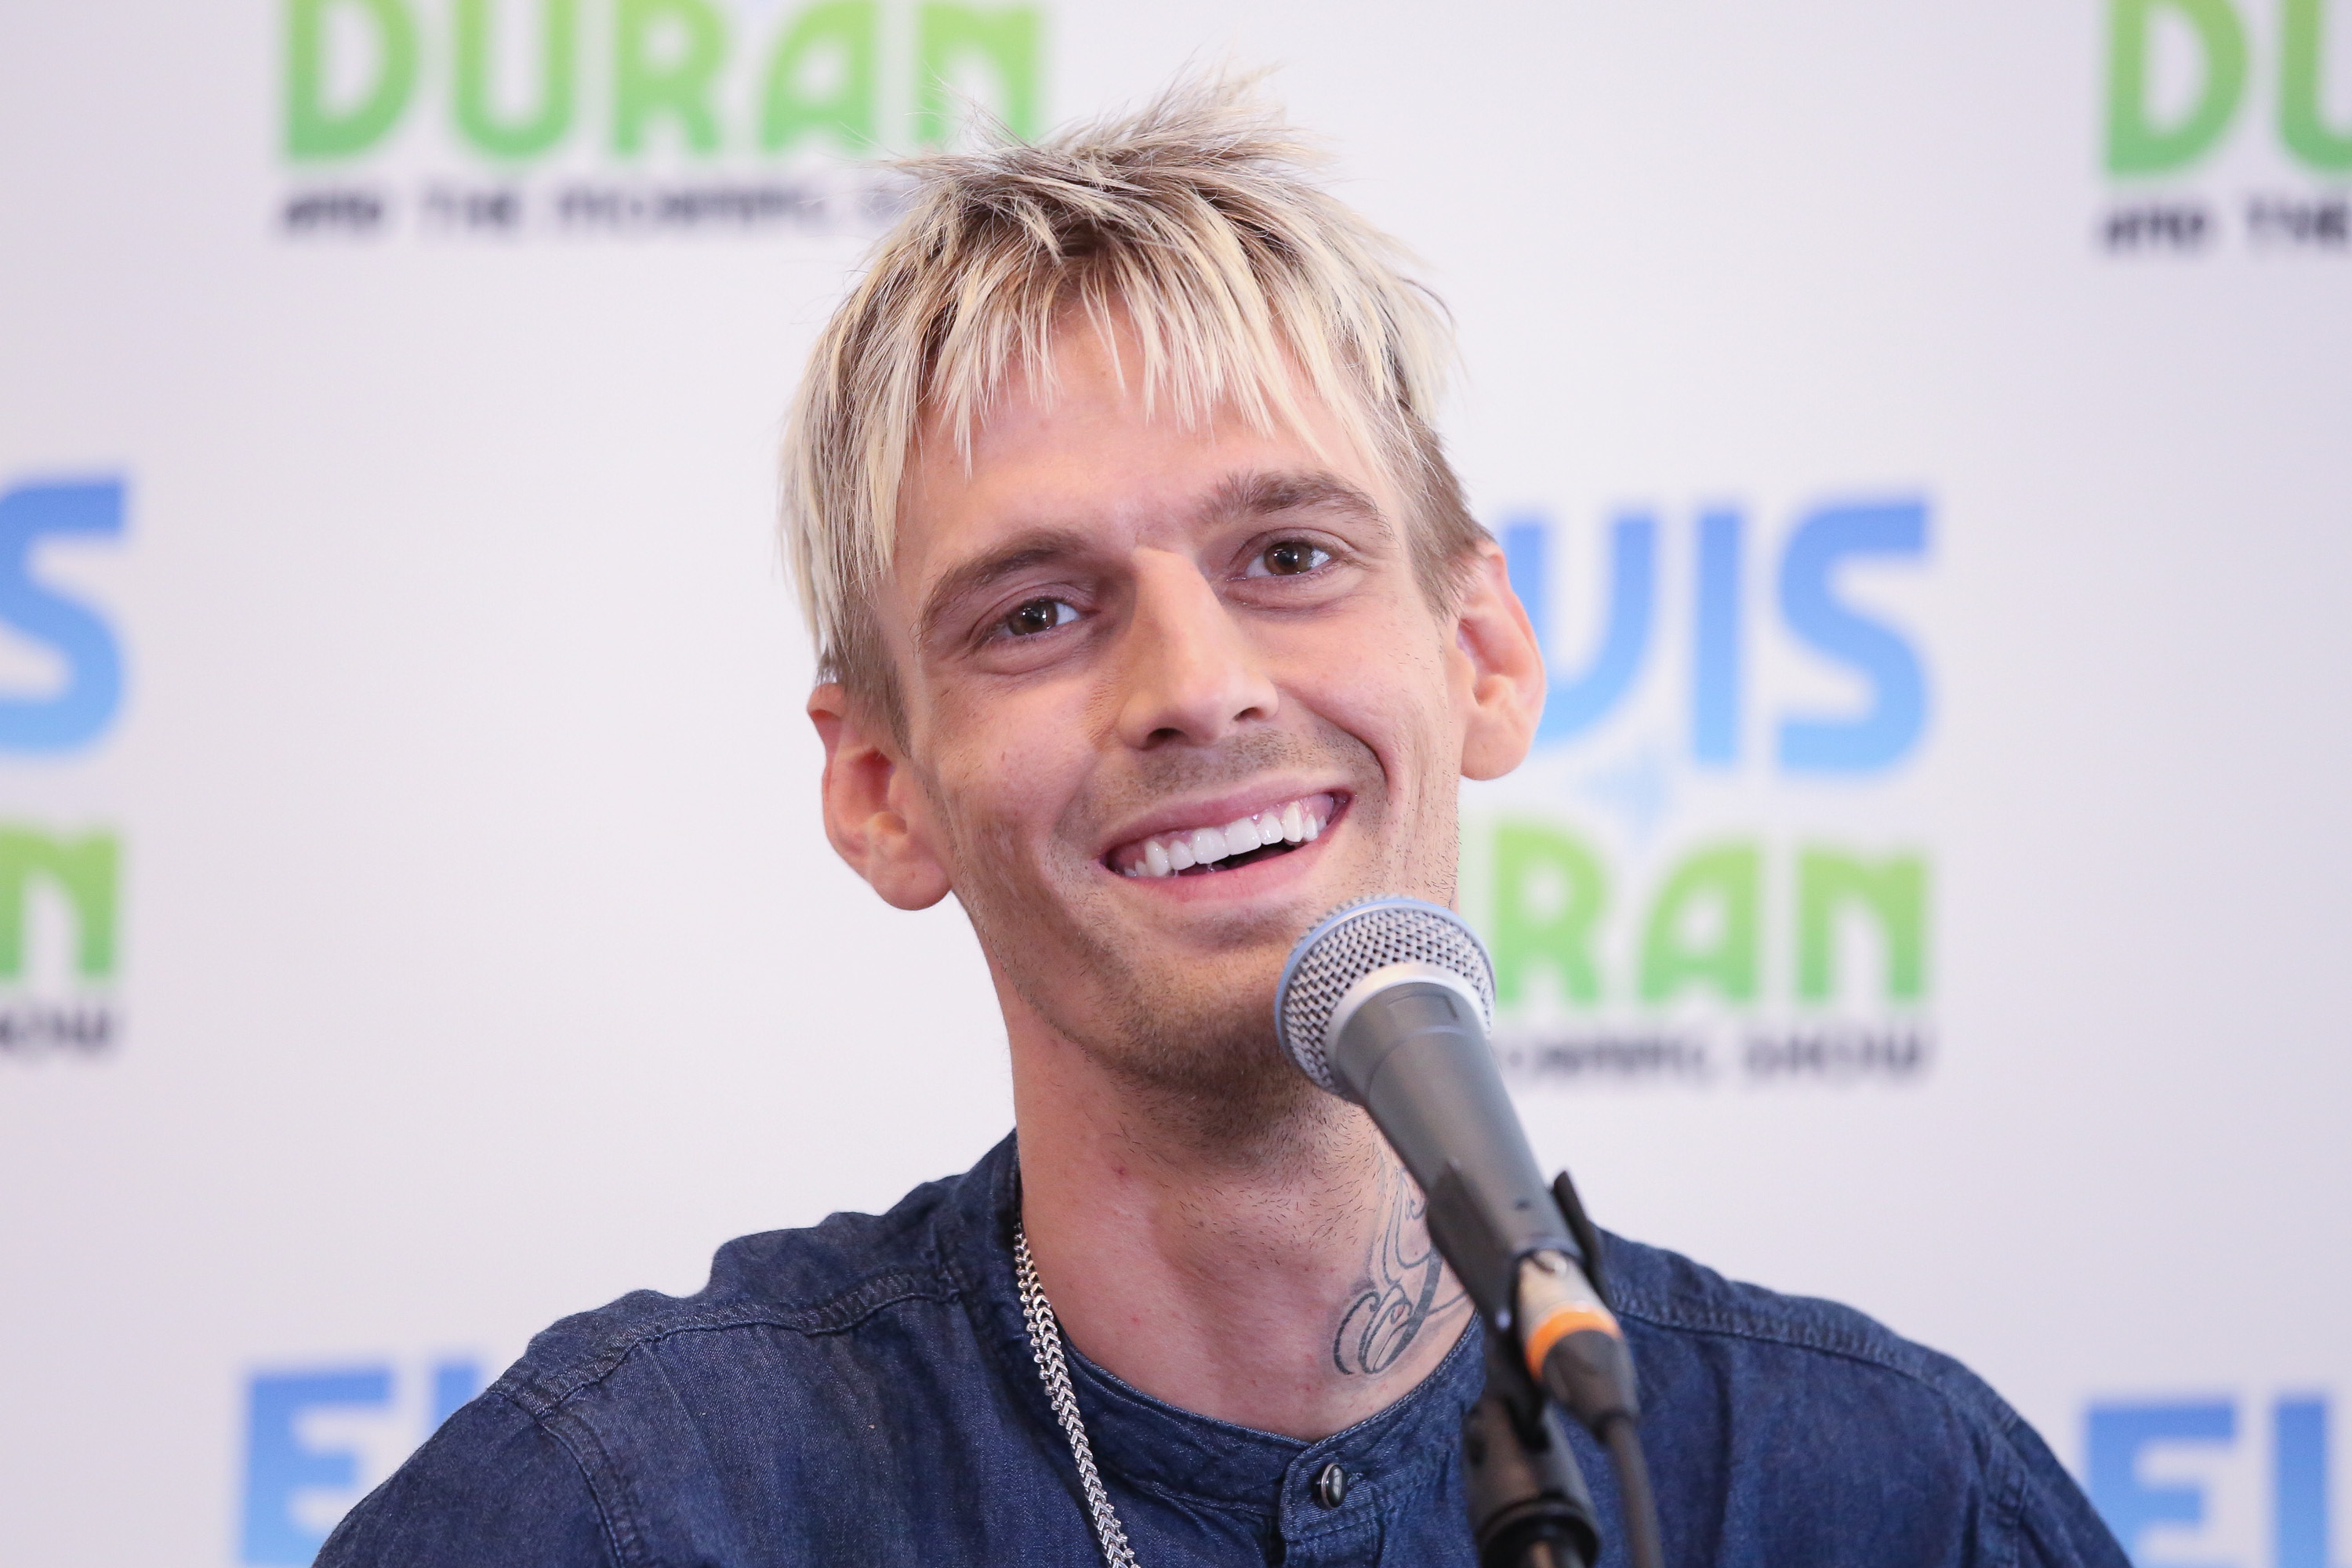 Aaron Carter Visits "The Elvis Duran Z100 Morning Show" in New York.